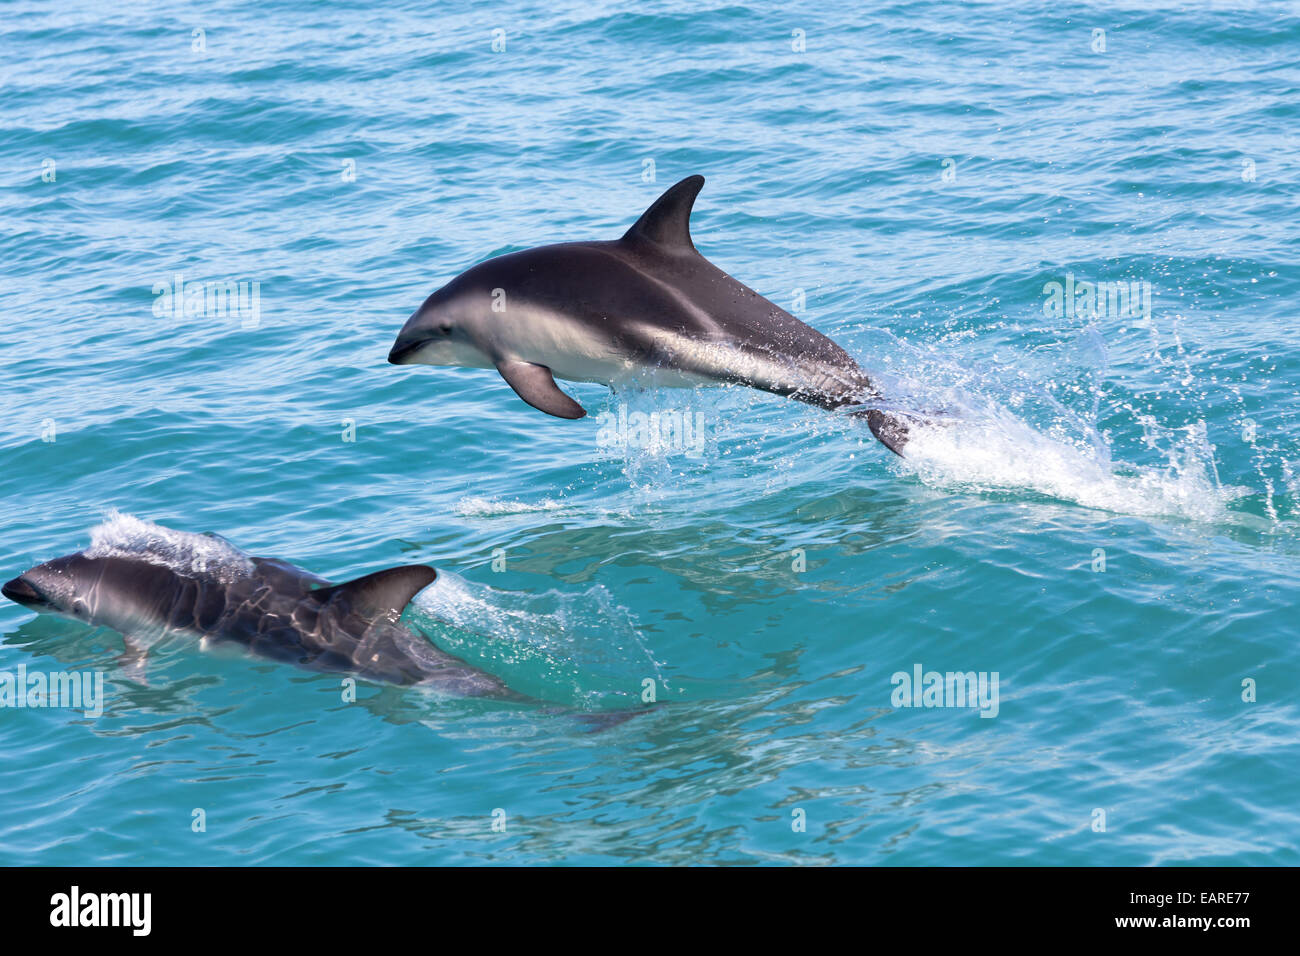 Hector's Dolphins (Cephalorhynchus hectori) jumping out of the water, Ferniehurst, Canterbury Region, New Zealand Stock Photo